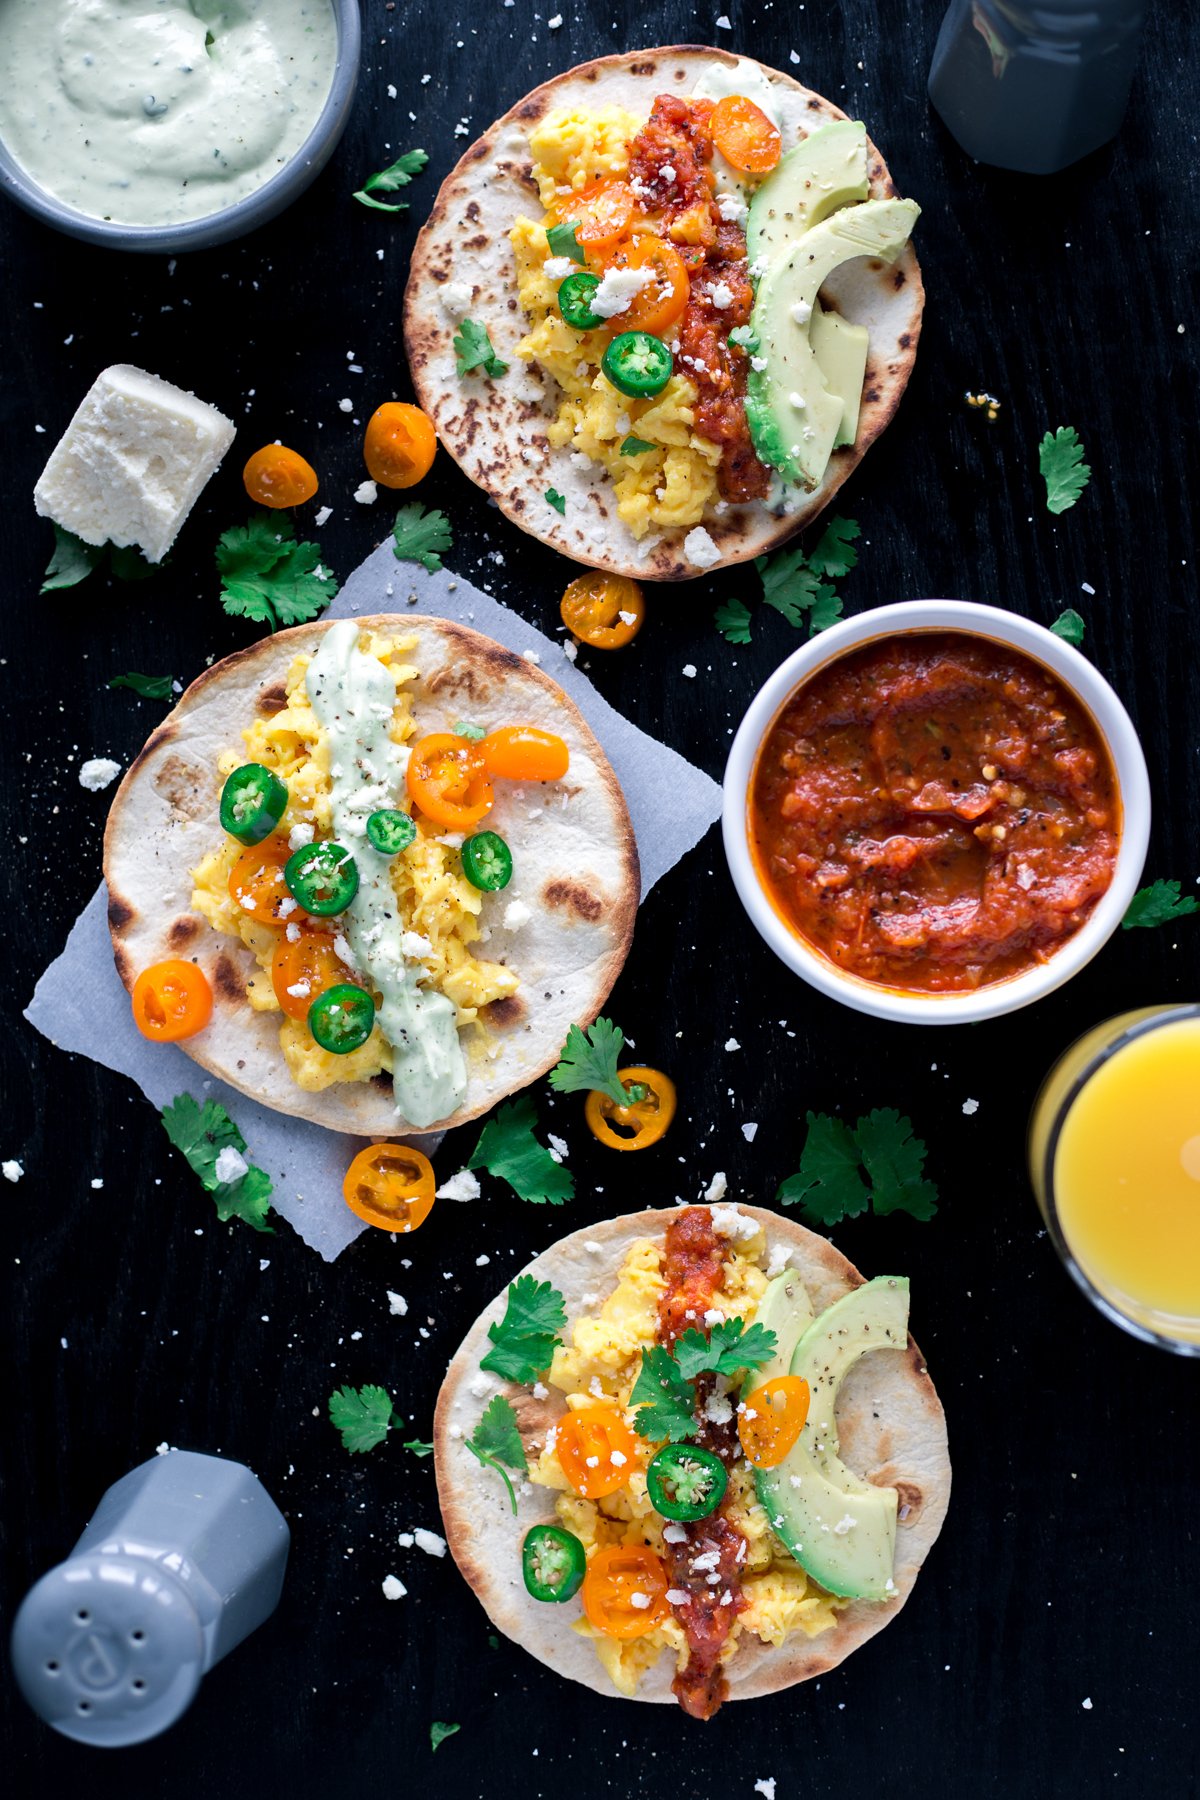 Breakfast recipes, easy and in a hurry, cannot be beat with these amazing Mexican breakfast tacos! Two blender sauces, lots of salty cheese, and fresh produce FTW! | asimplepantry.com